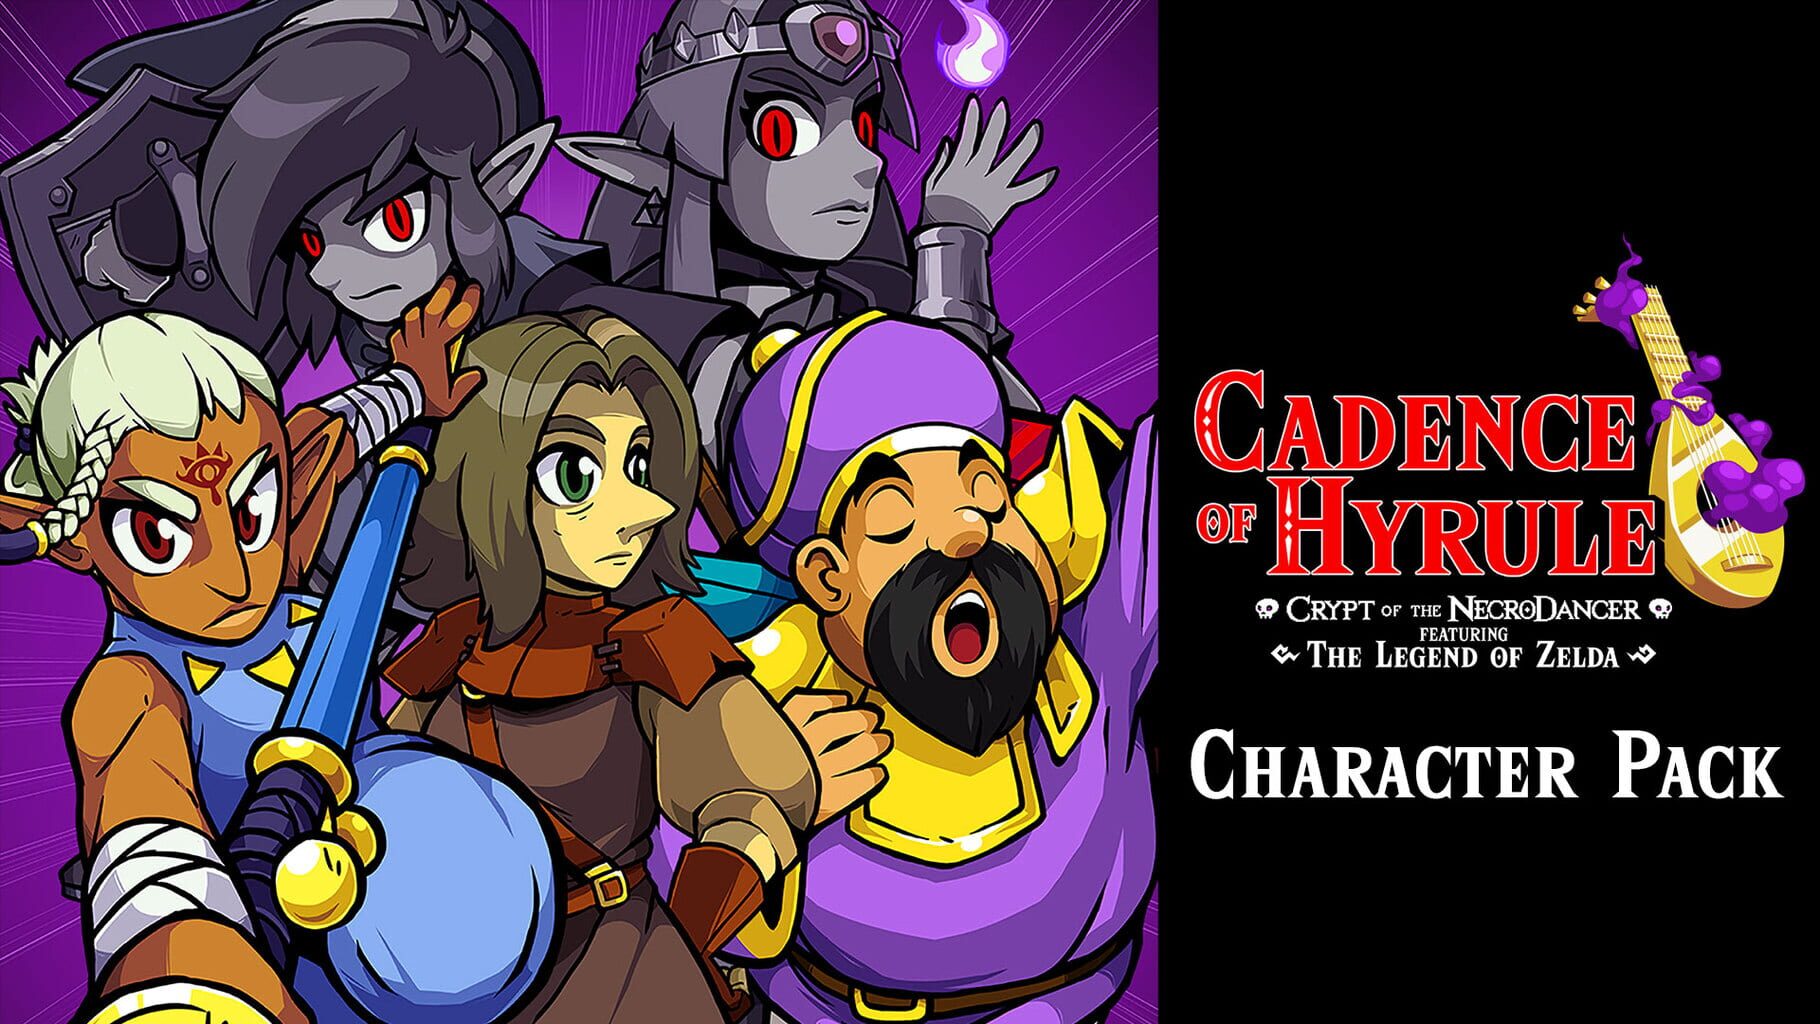 Cadence of Hyrule: Crypt of the NecroDancer Featuring the Legend of Zelda - Character Pack artwork